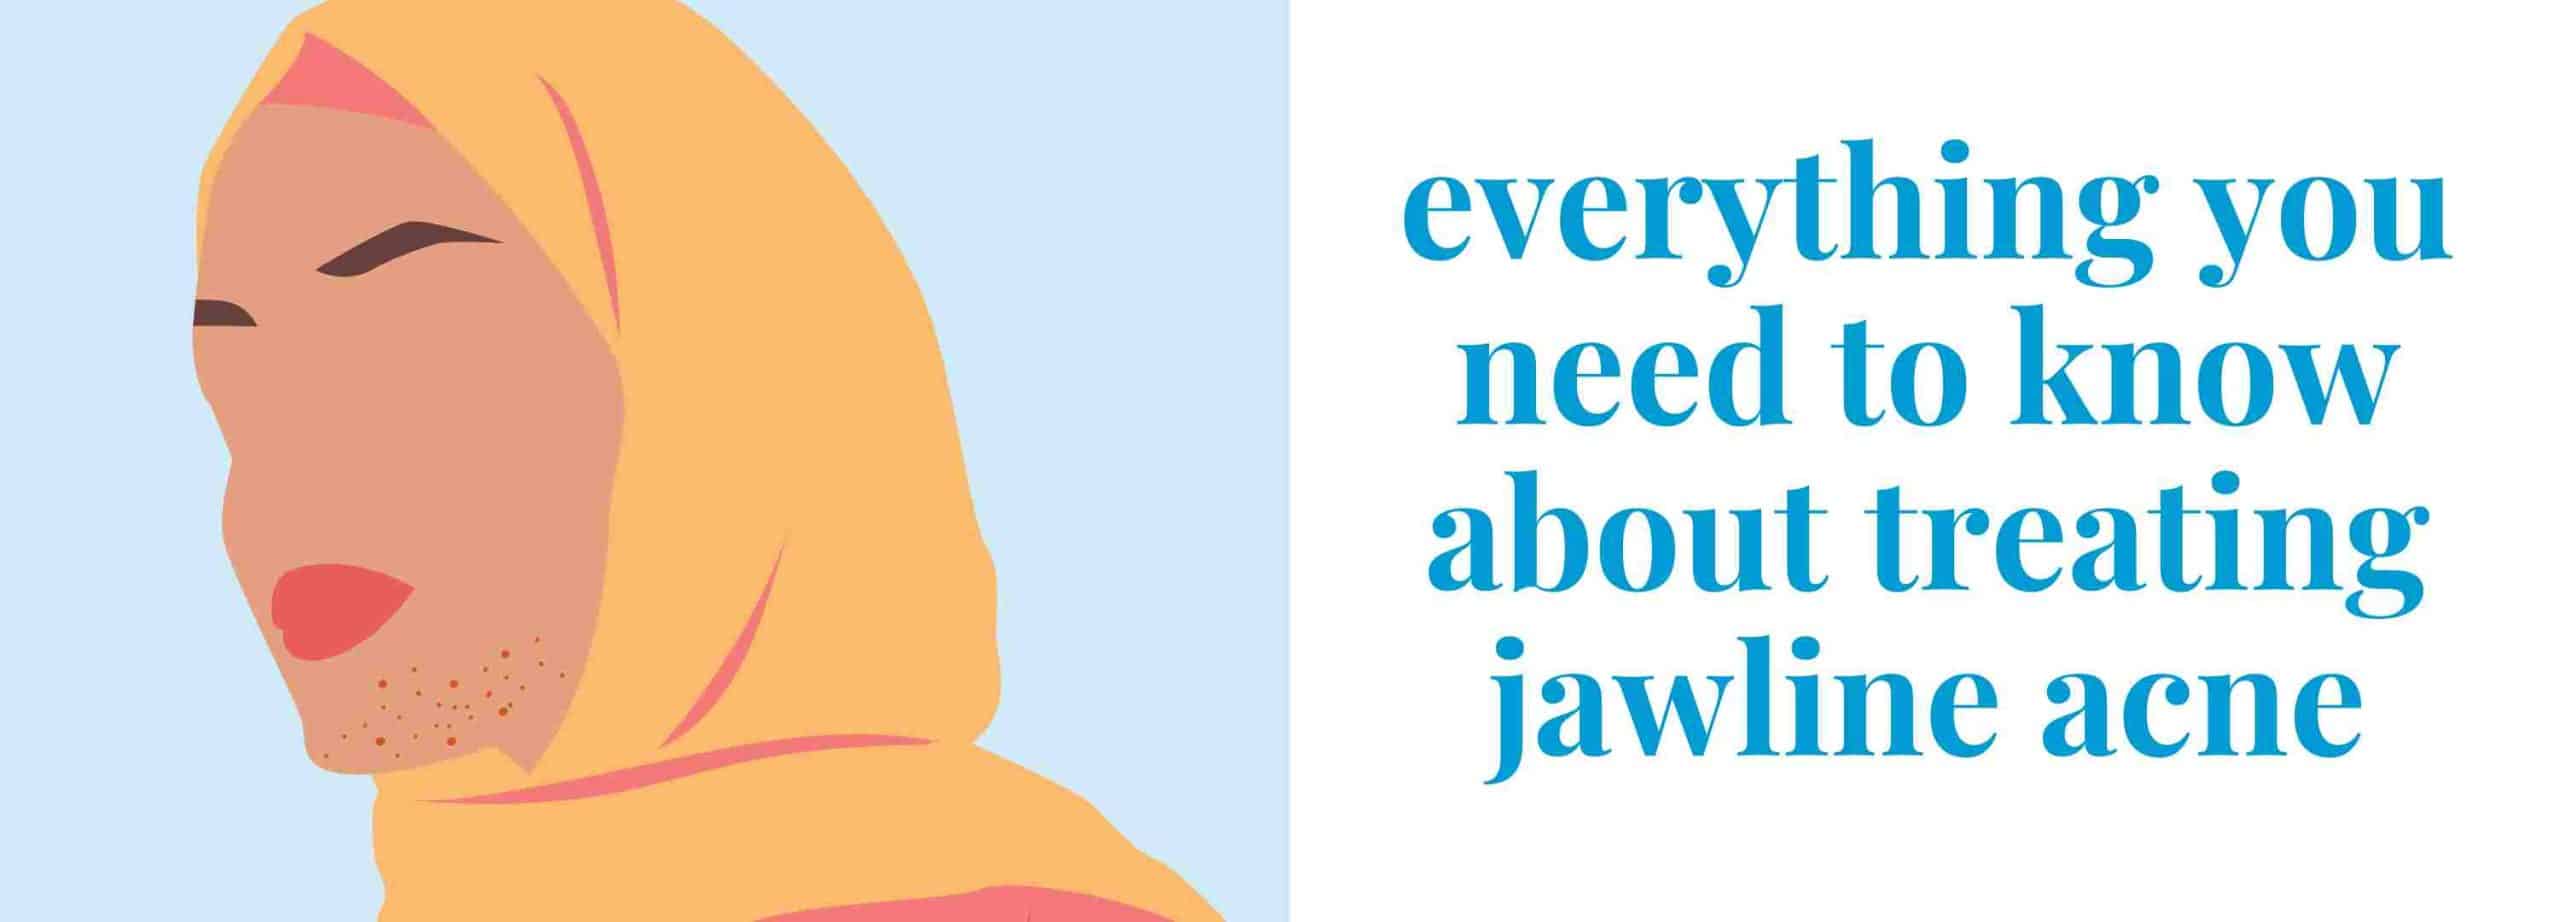 Jawline Acne: Causes, Prevention & Tips For Quick Relief